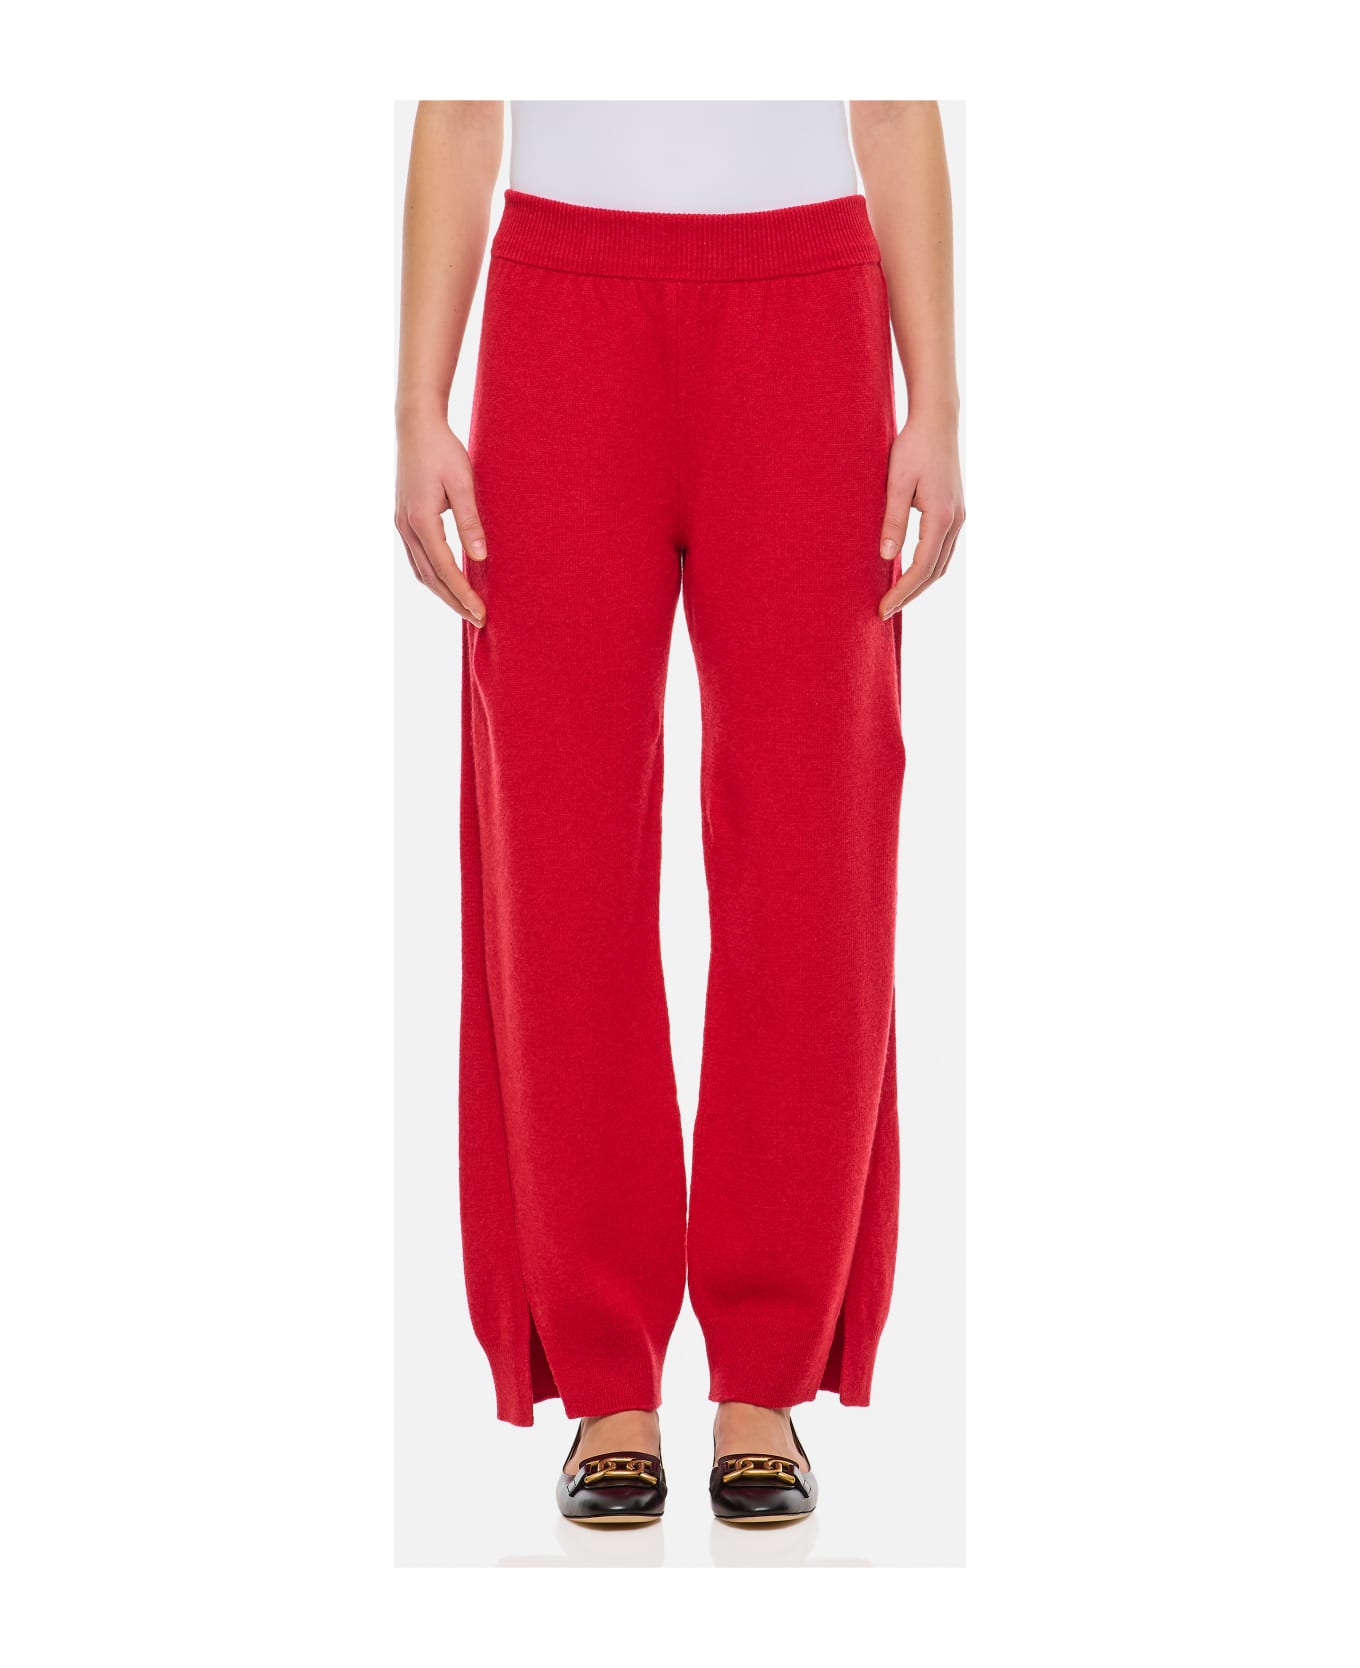 Barrie Cashmere Jogging Pants - Red